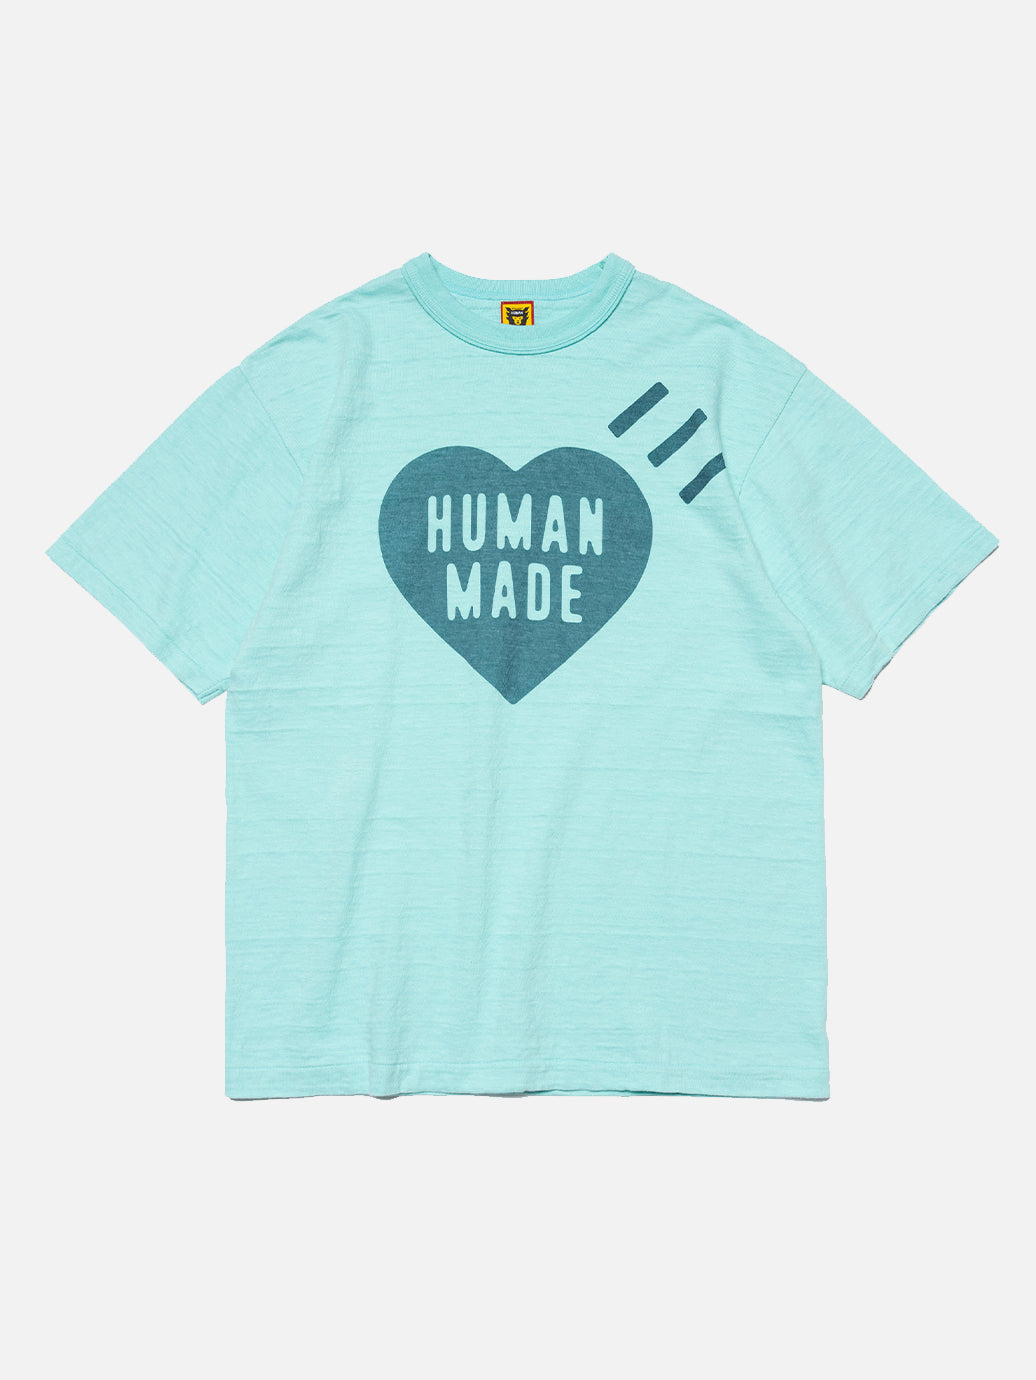 Human Made Color T-Shirt #1 – OALLERY